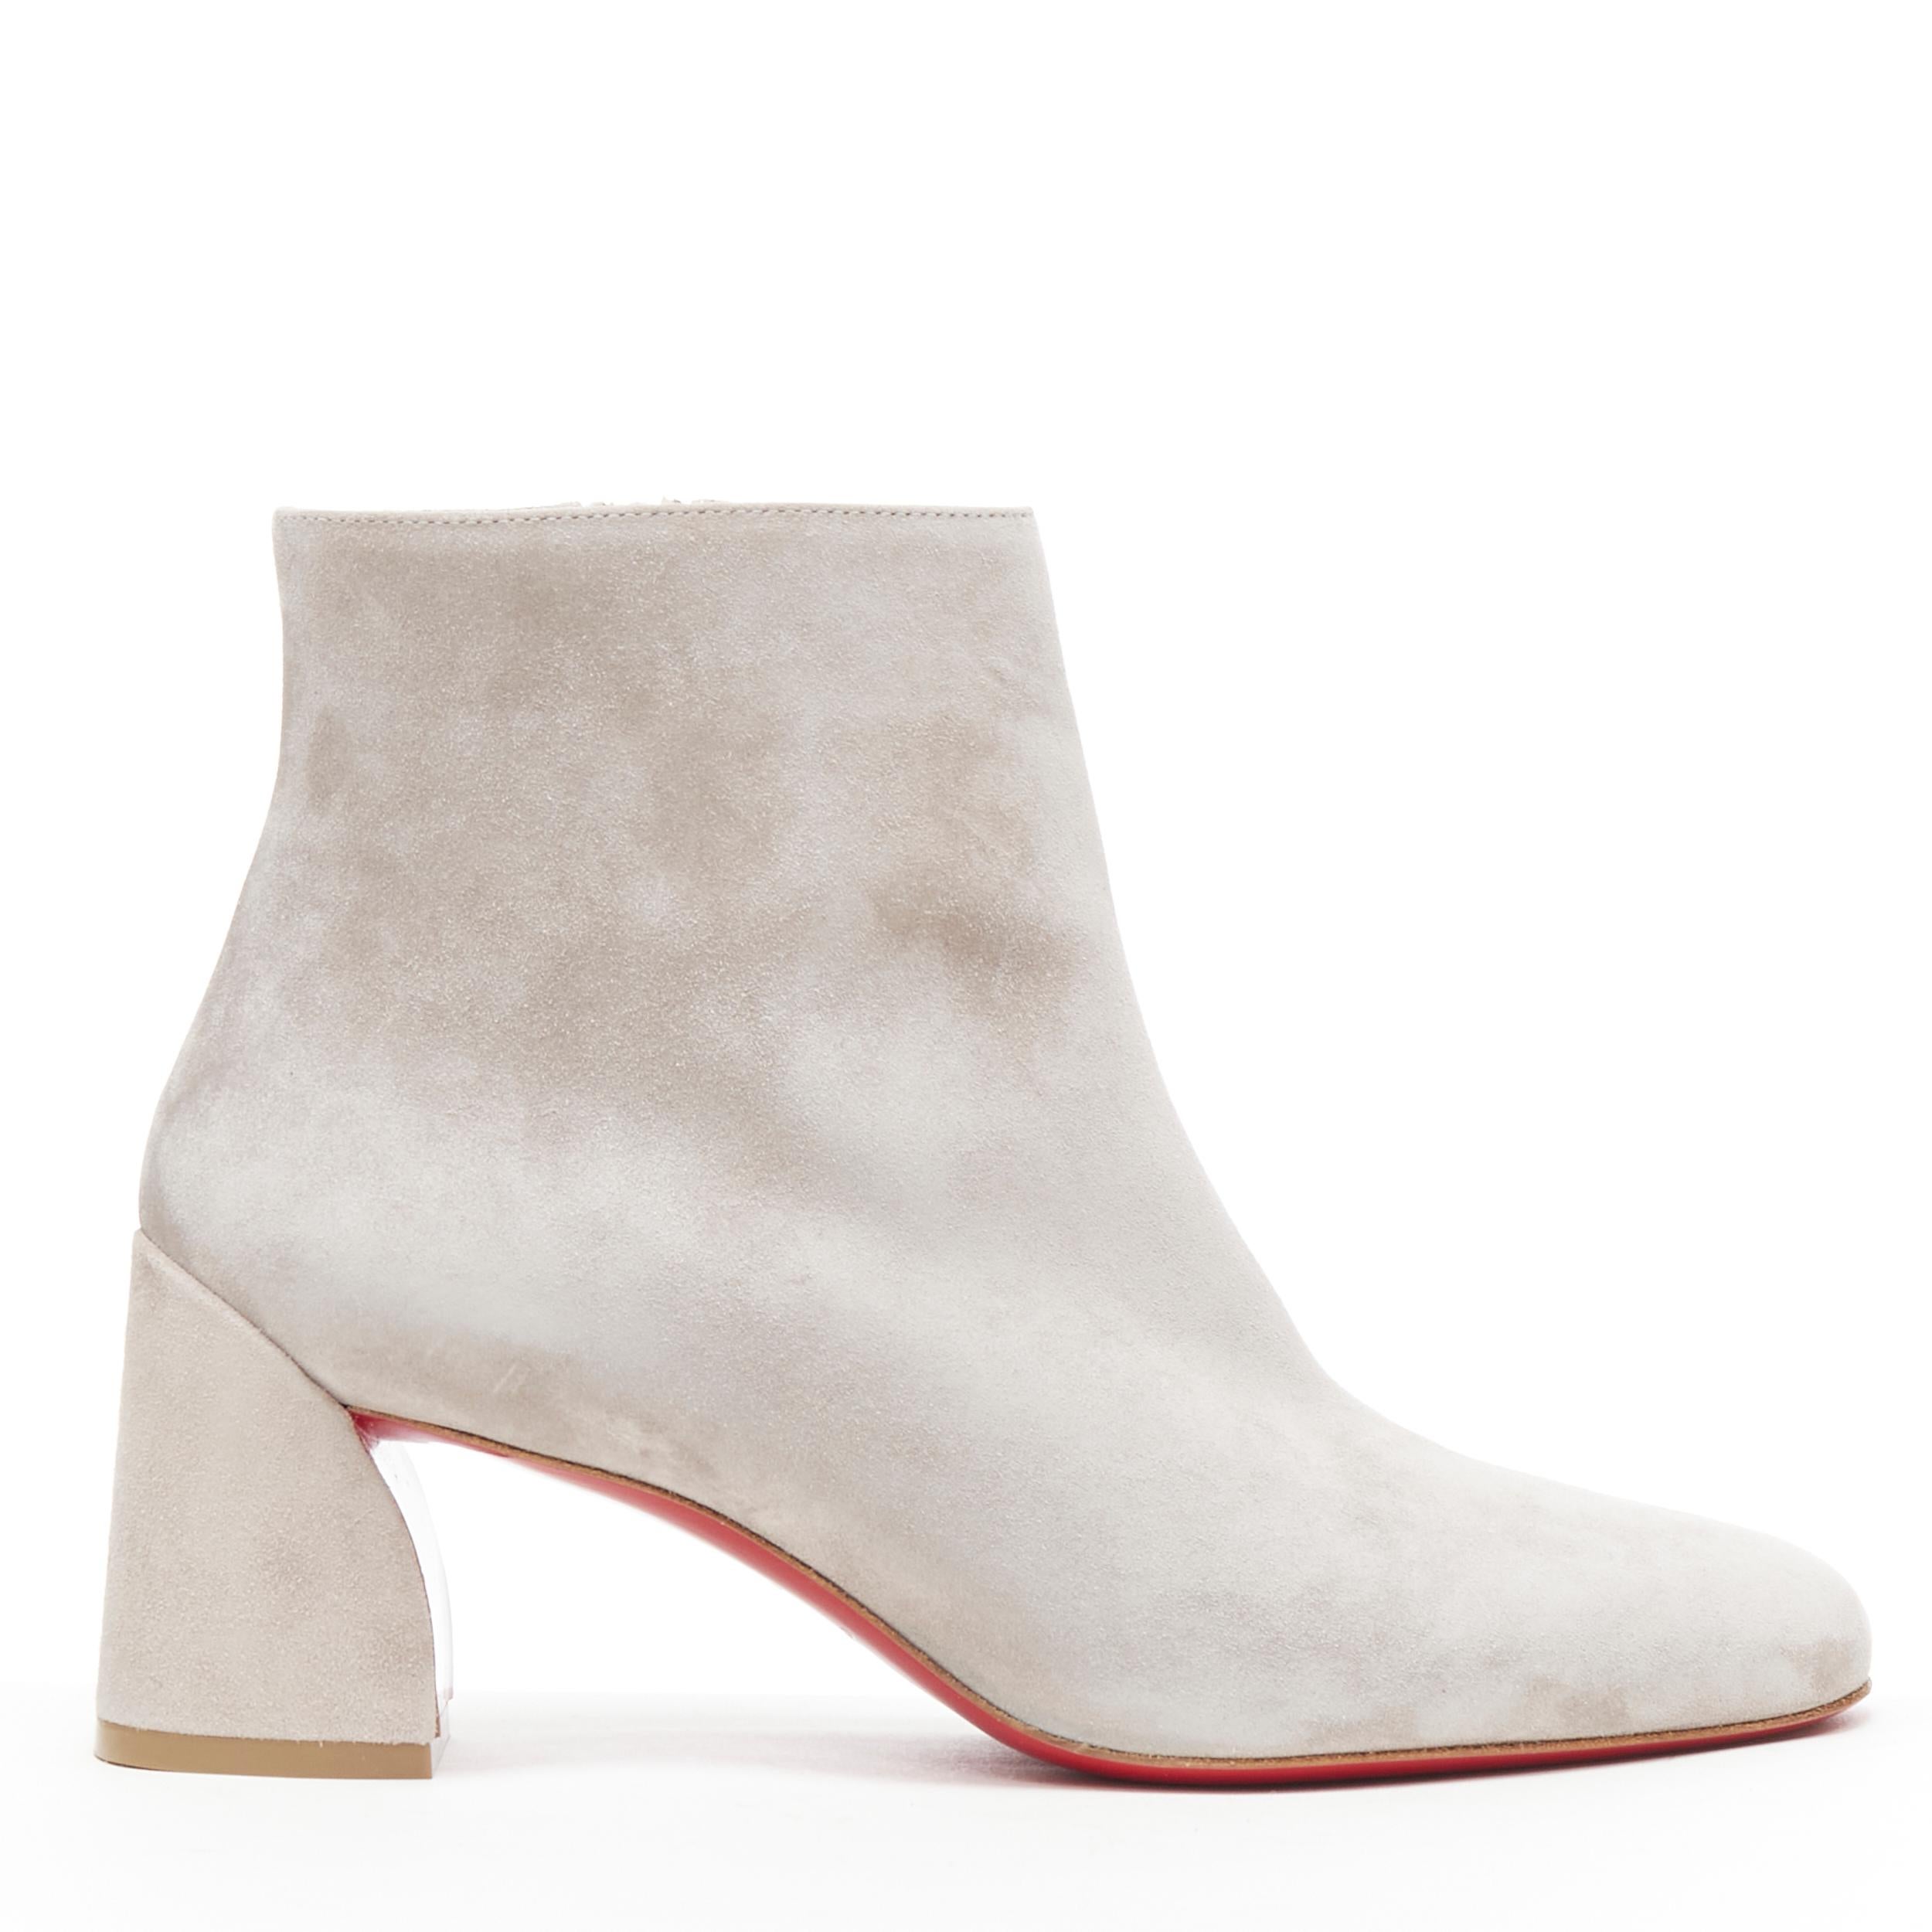 new CHRISTIAN LOUBOUTIN Turela 55 grey suede curved chunky heel bootie EU38 Reference: TGAS/B00258 
Brand: Christian Louboutin 
Designer: Christian Louboutin 
Material: Suede 
Color: Grey 
Pattern: Solid 
Closure: Zip 
Extra Detail: Turela 55. Grey